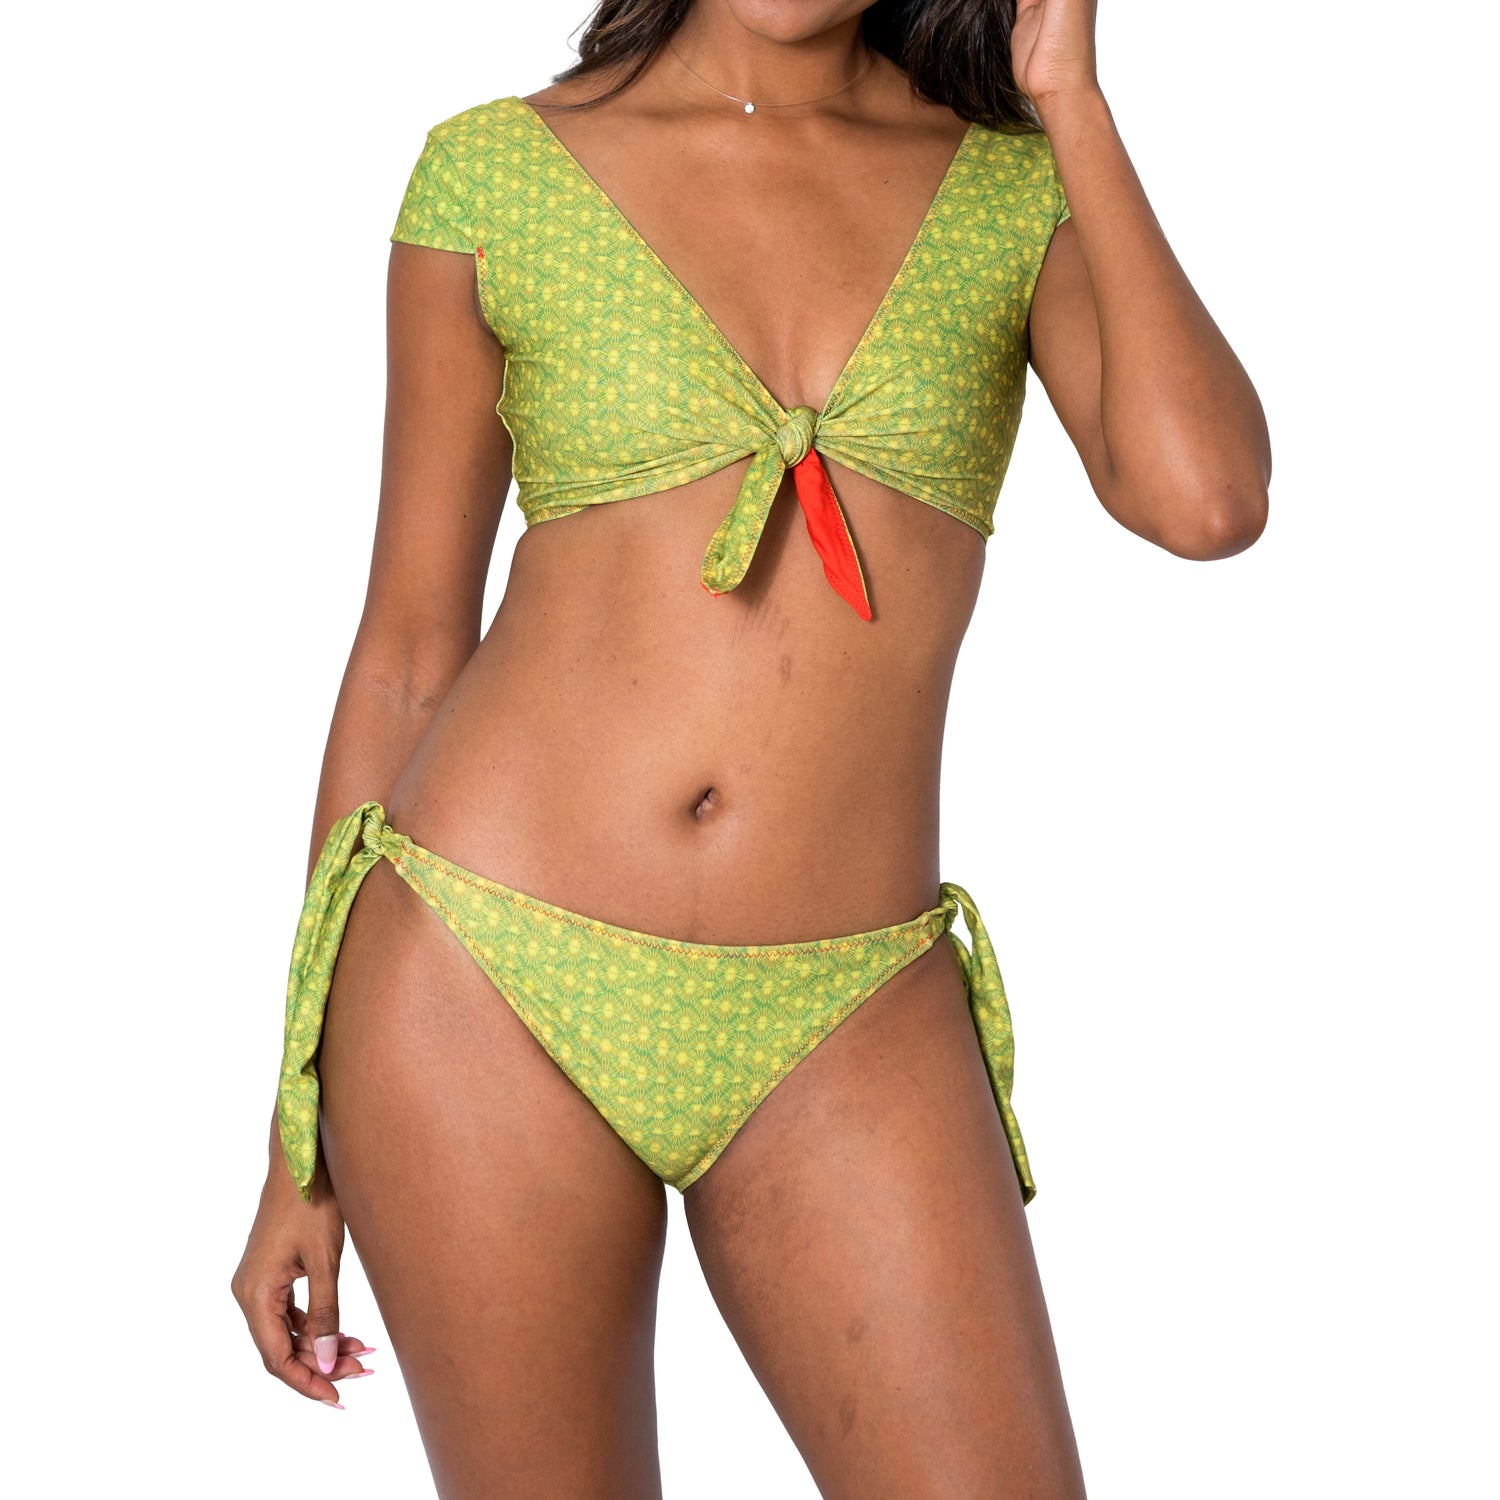 Aima Dora - Side-Tie Bottom - Front / Turtle Bay - Baie aux tortues